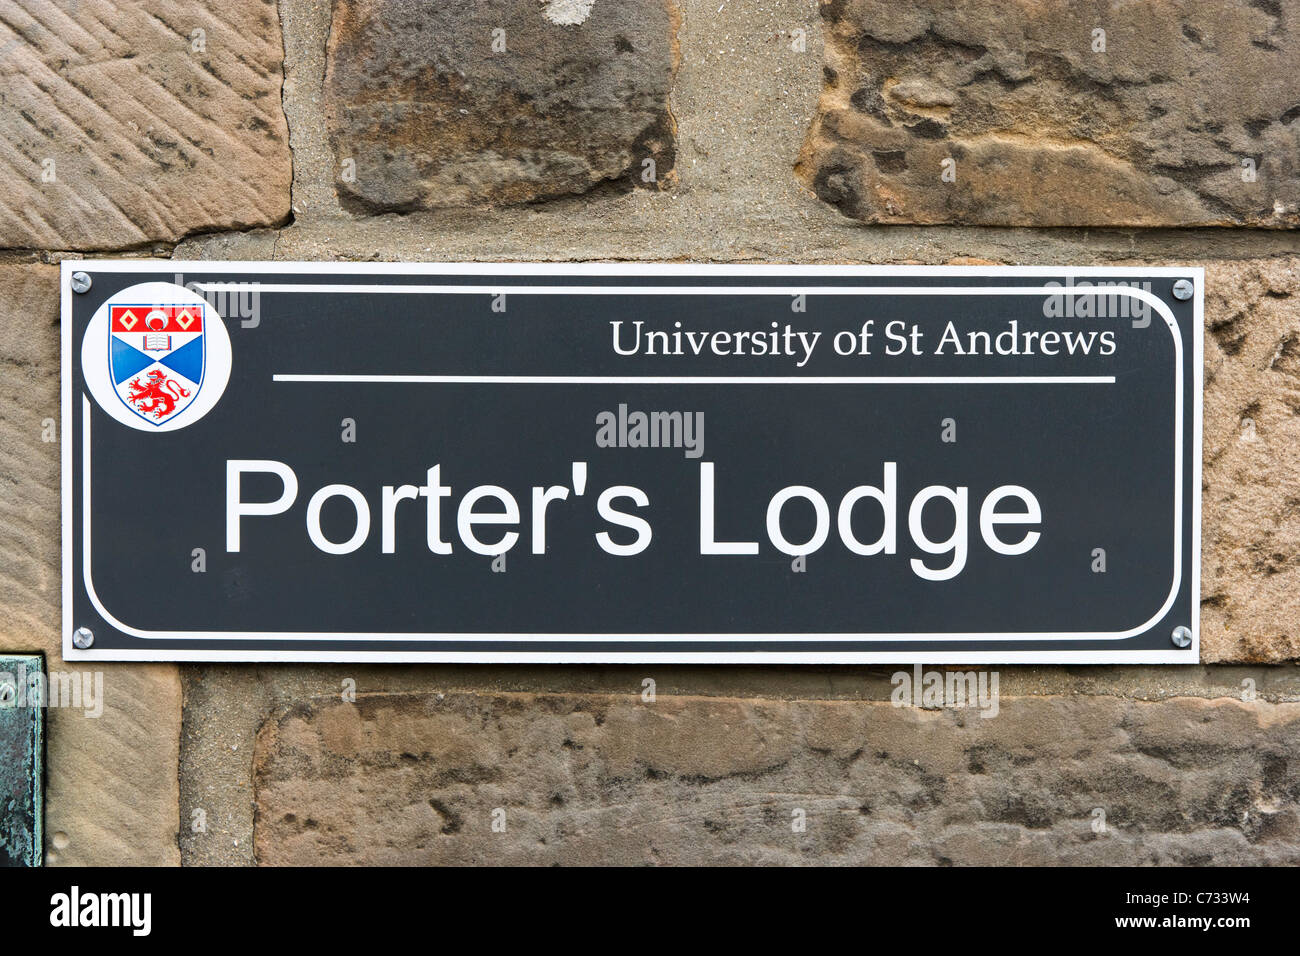 Sign for the Porter's Lodge at the University of St Andrews, St Andrews, Fife, Central Scotland, UK Stock Photo